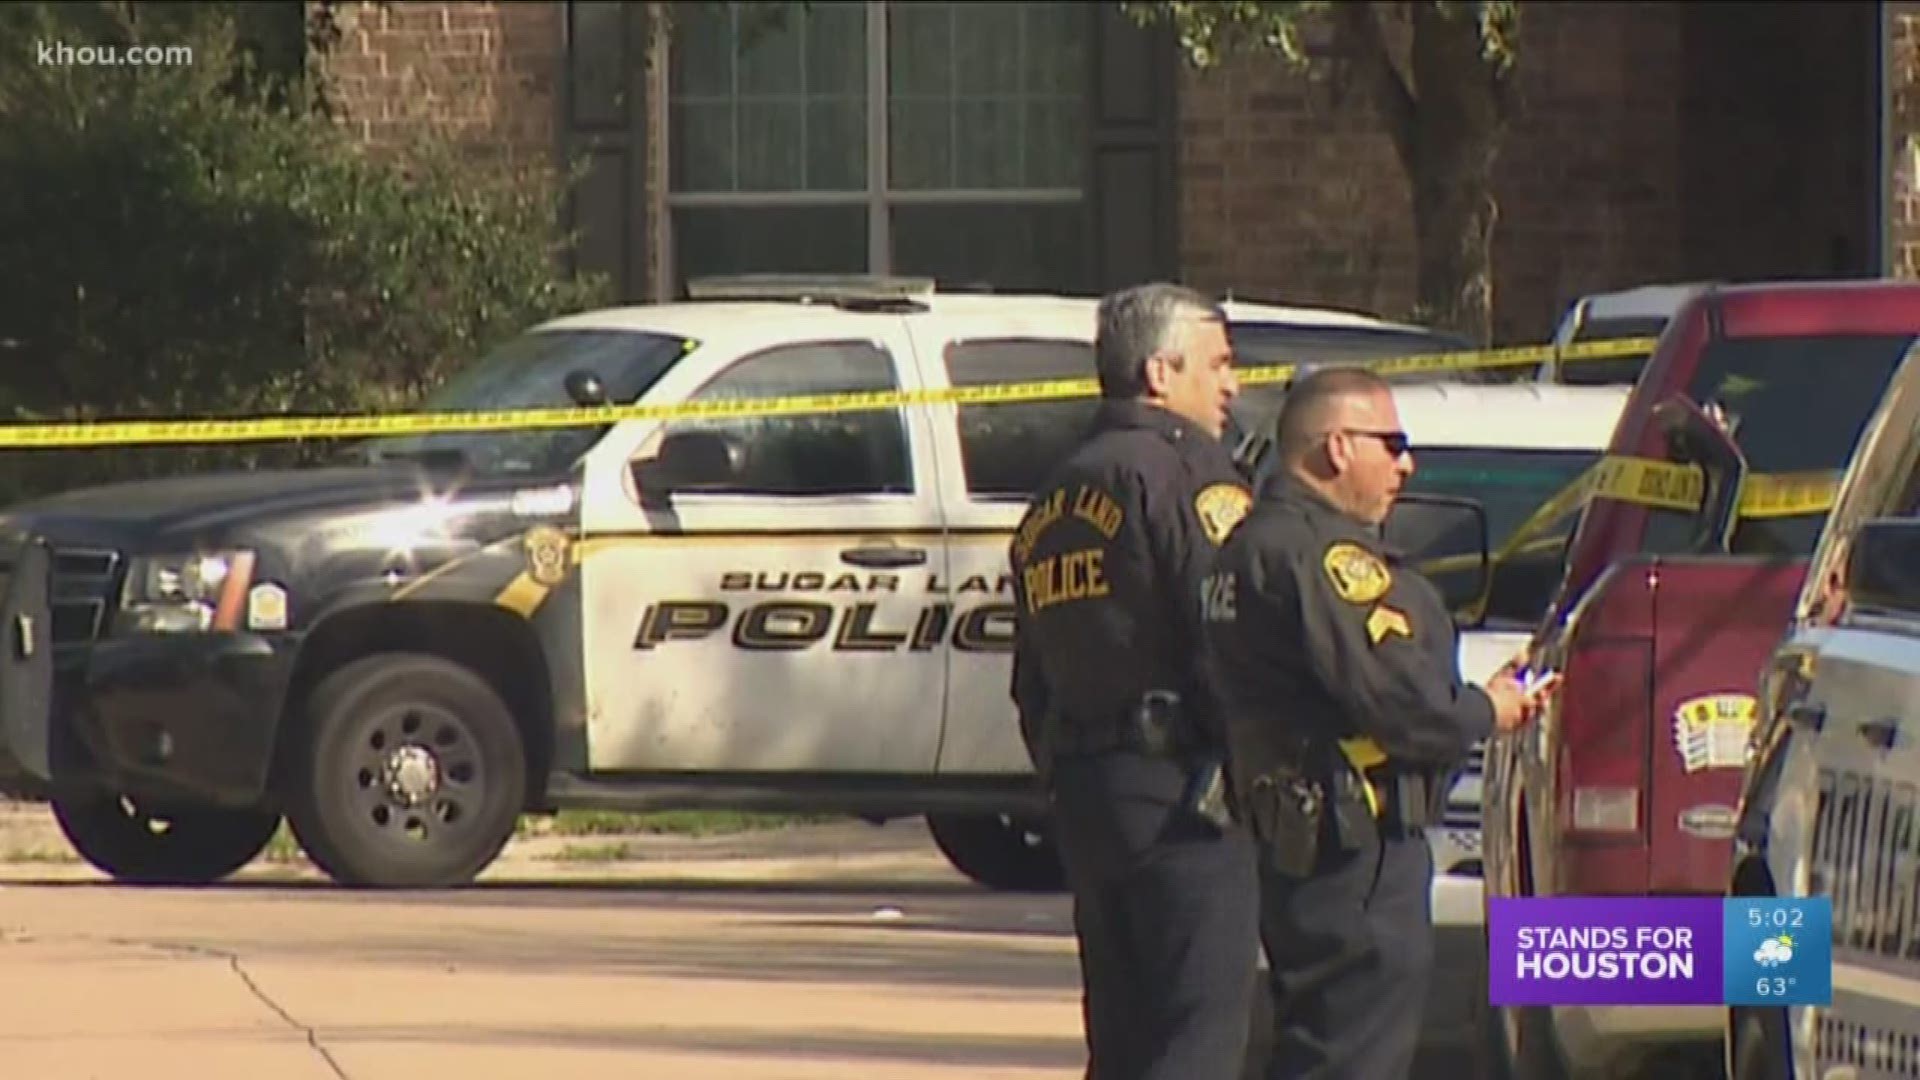 Police are investigating an apparent murder-suicide after a woman’s body was found in a driveway and her husband’s body was found inside their Sugar Land home.